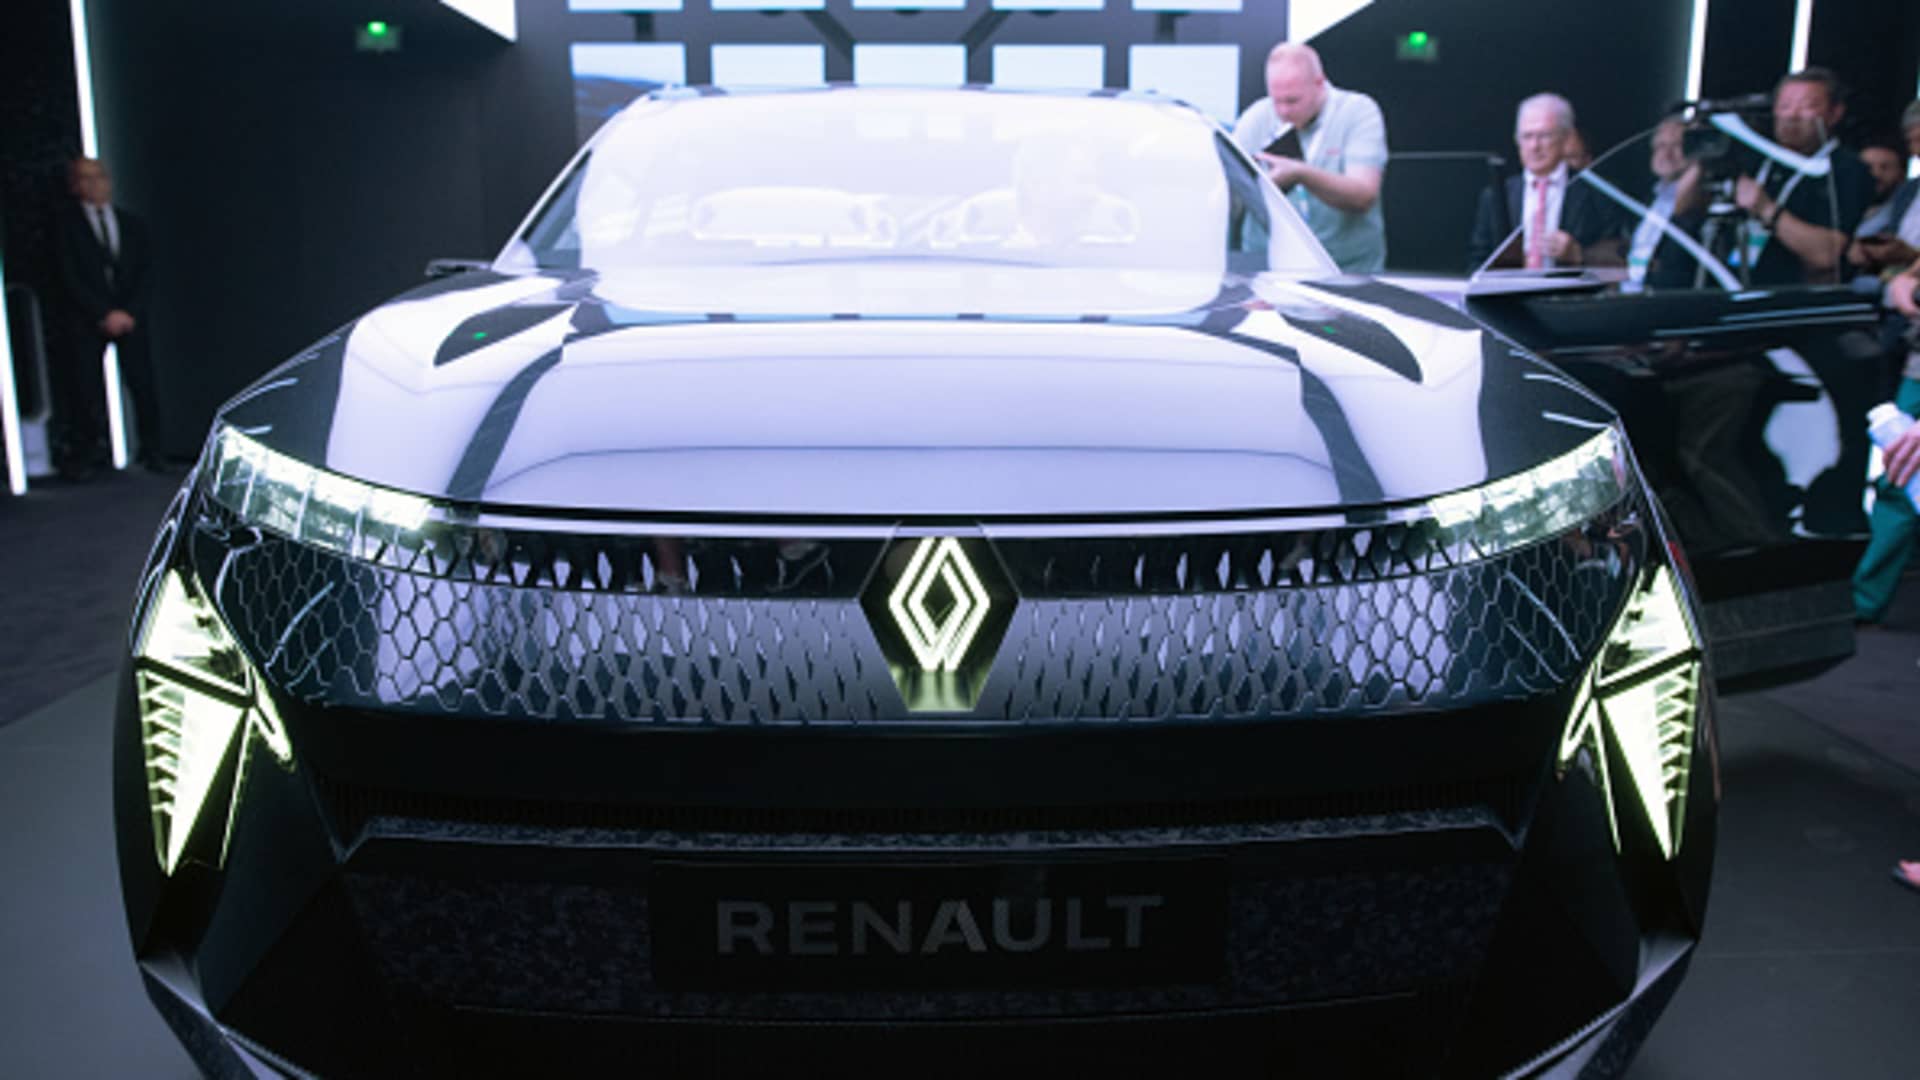 Renault and Google team up to develop a 'software defined' vehicle